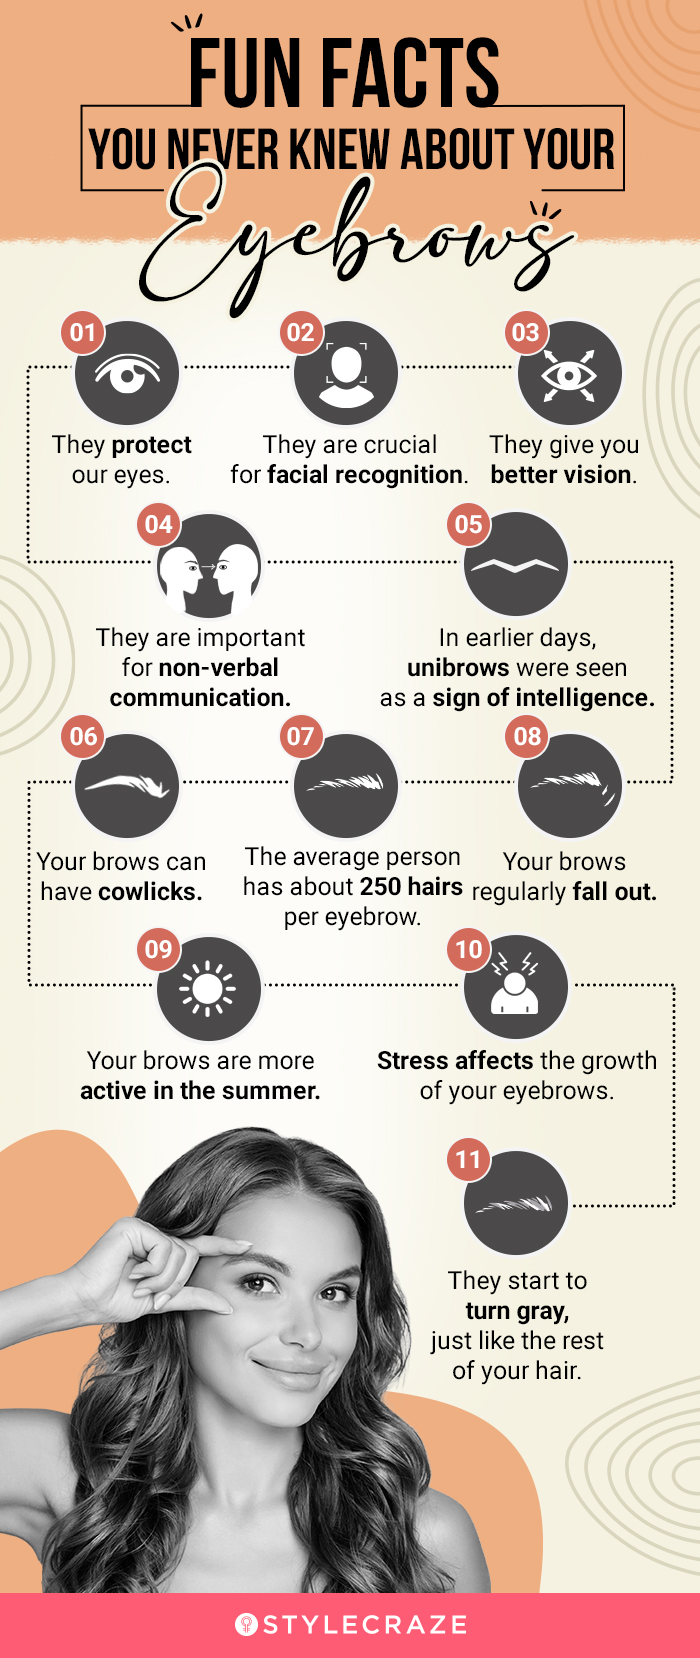 fun facts you never knew about your eyebrows [infographic]